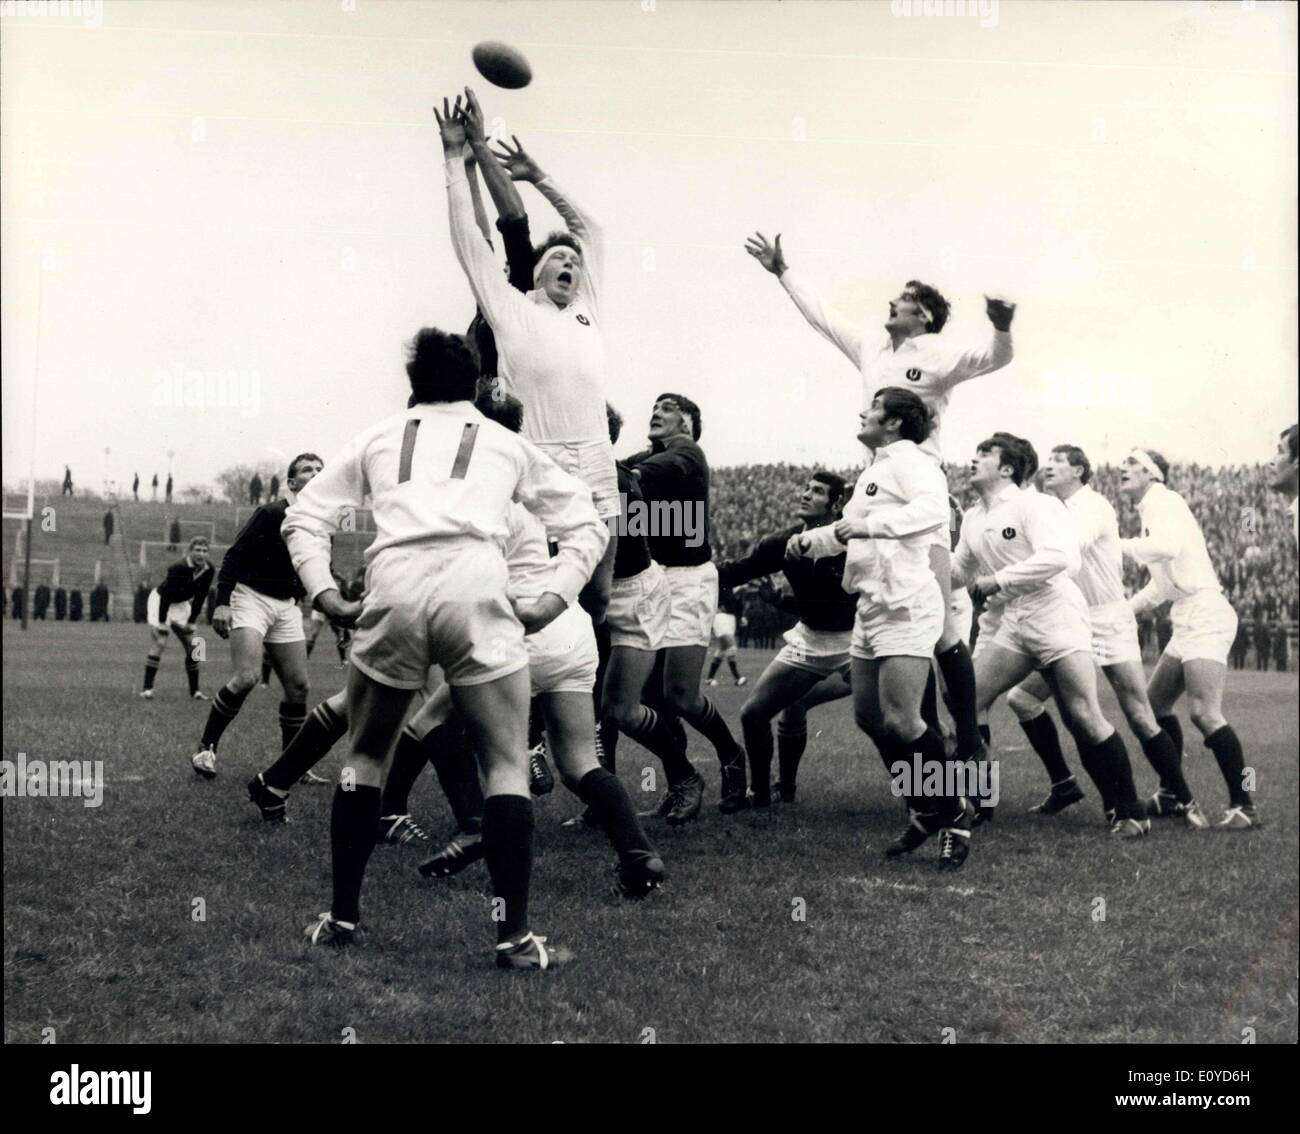 Dec. 08, 1969 - Scotland beat the Springboks:Photo shows Incident during the Scotland (light jerseys) and South Africa rugby match at Murrayfield, Scotland, on Saturday, which Scotland won 6-3. Stock Photo